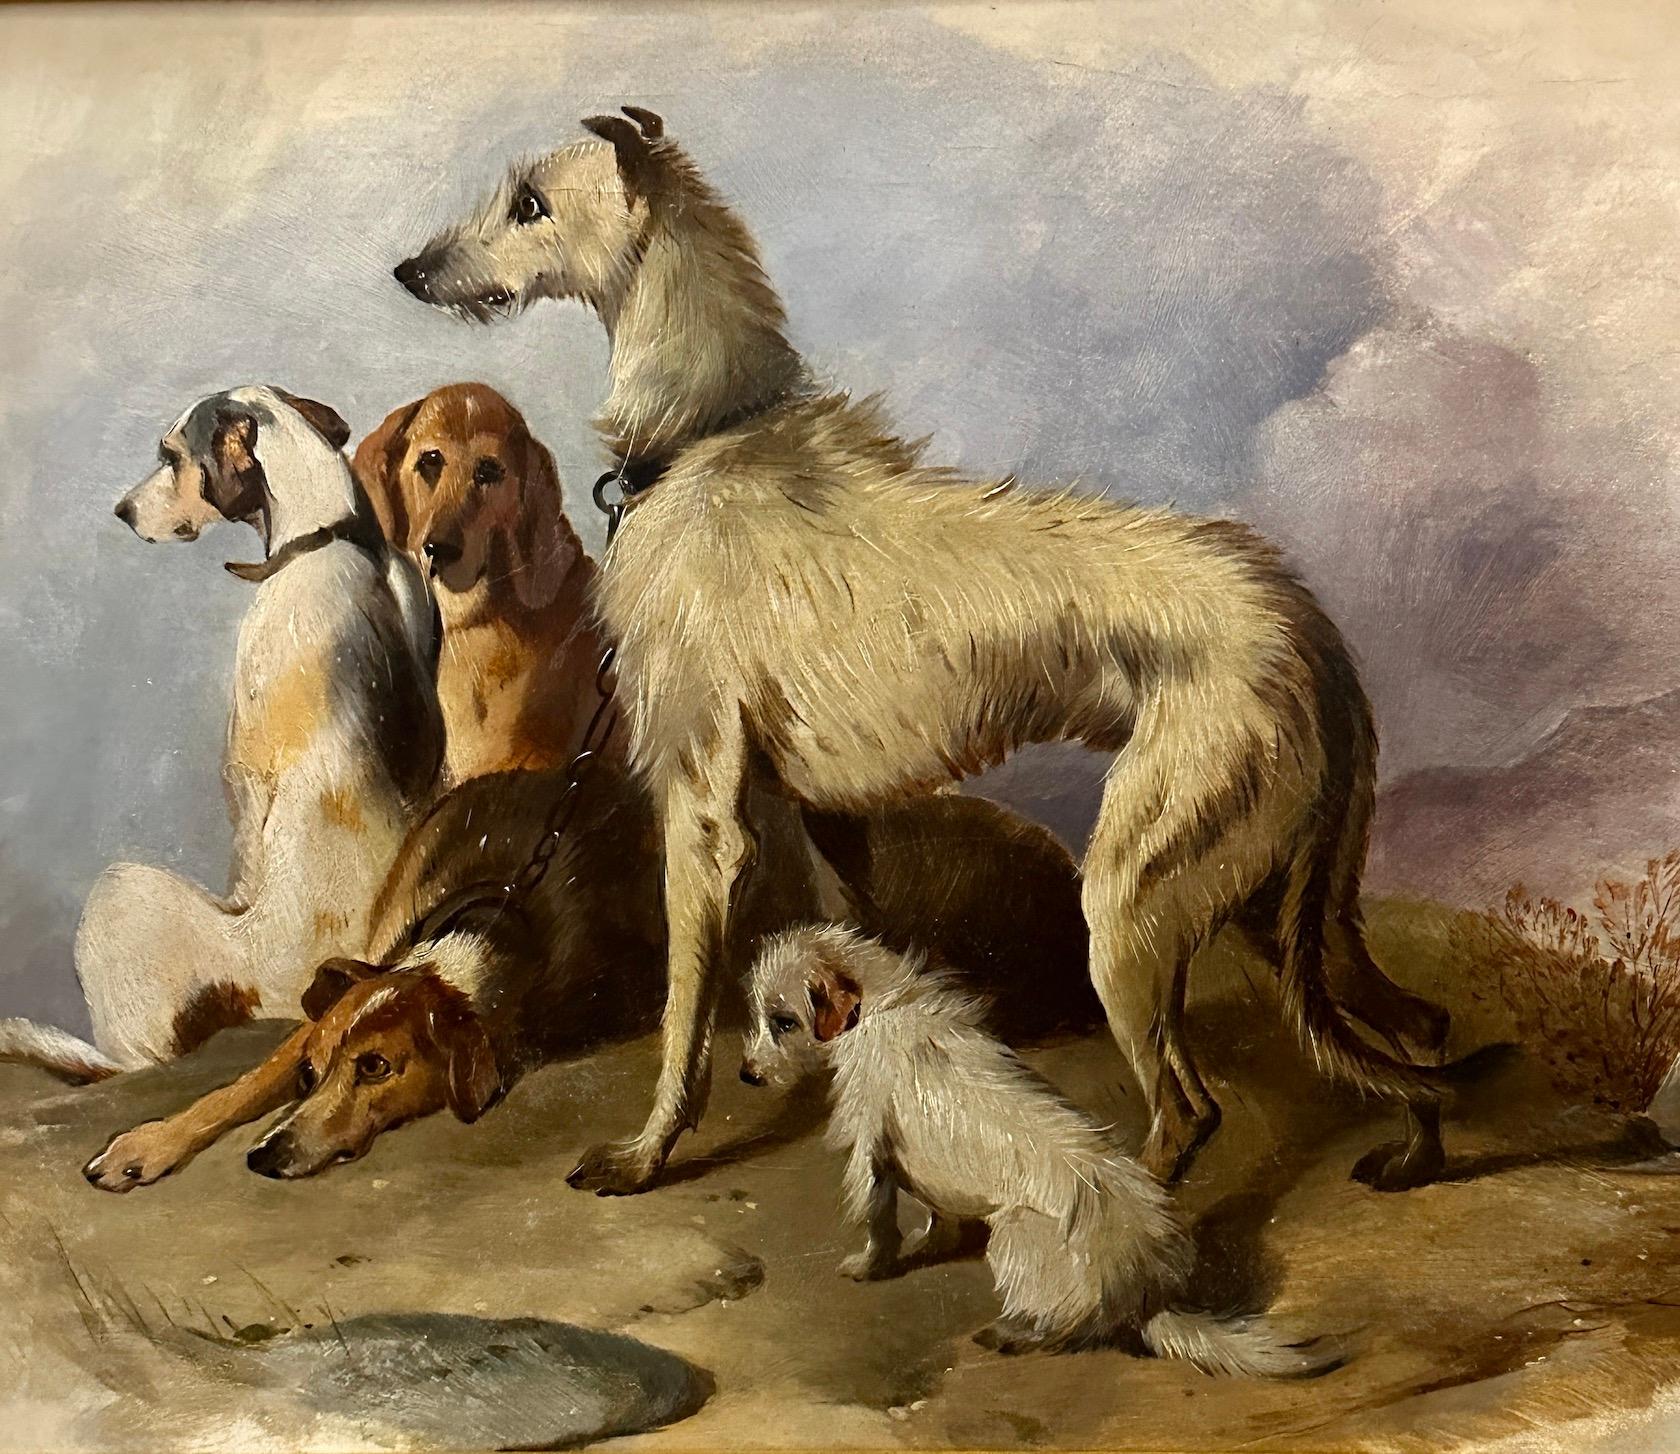 Scottish 19th century Highland group of dogs in a landscape looking noble - Painting by Sir Edwin Landseer